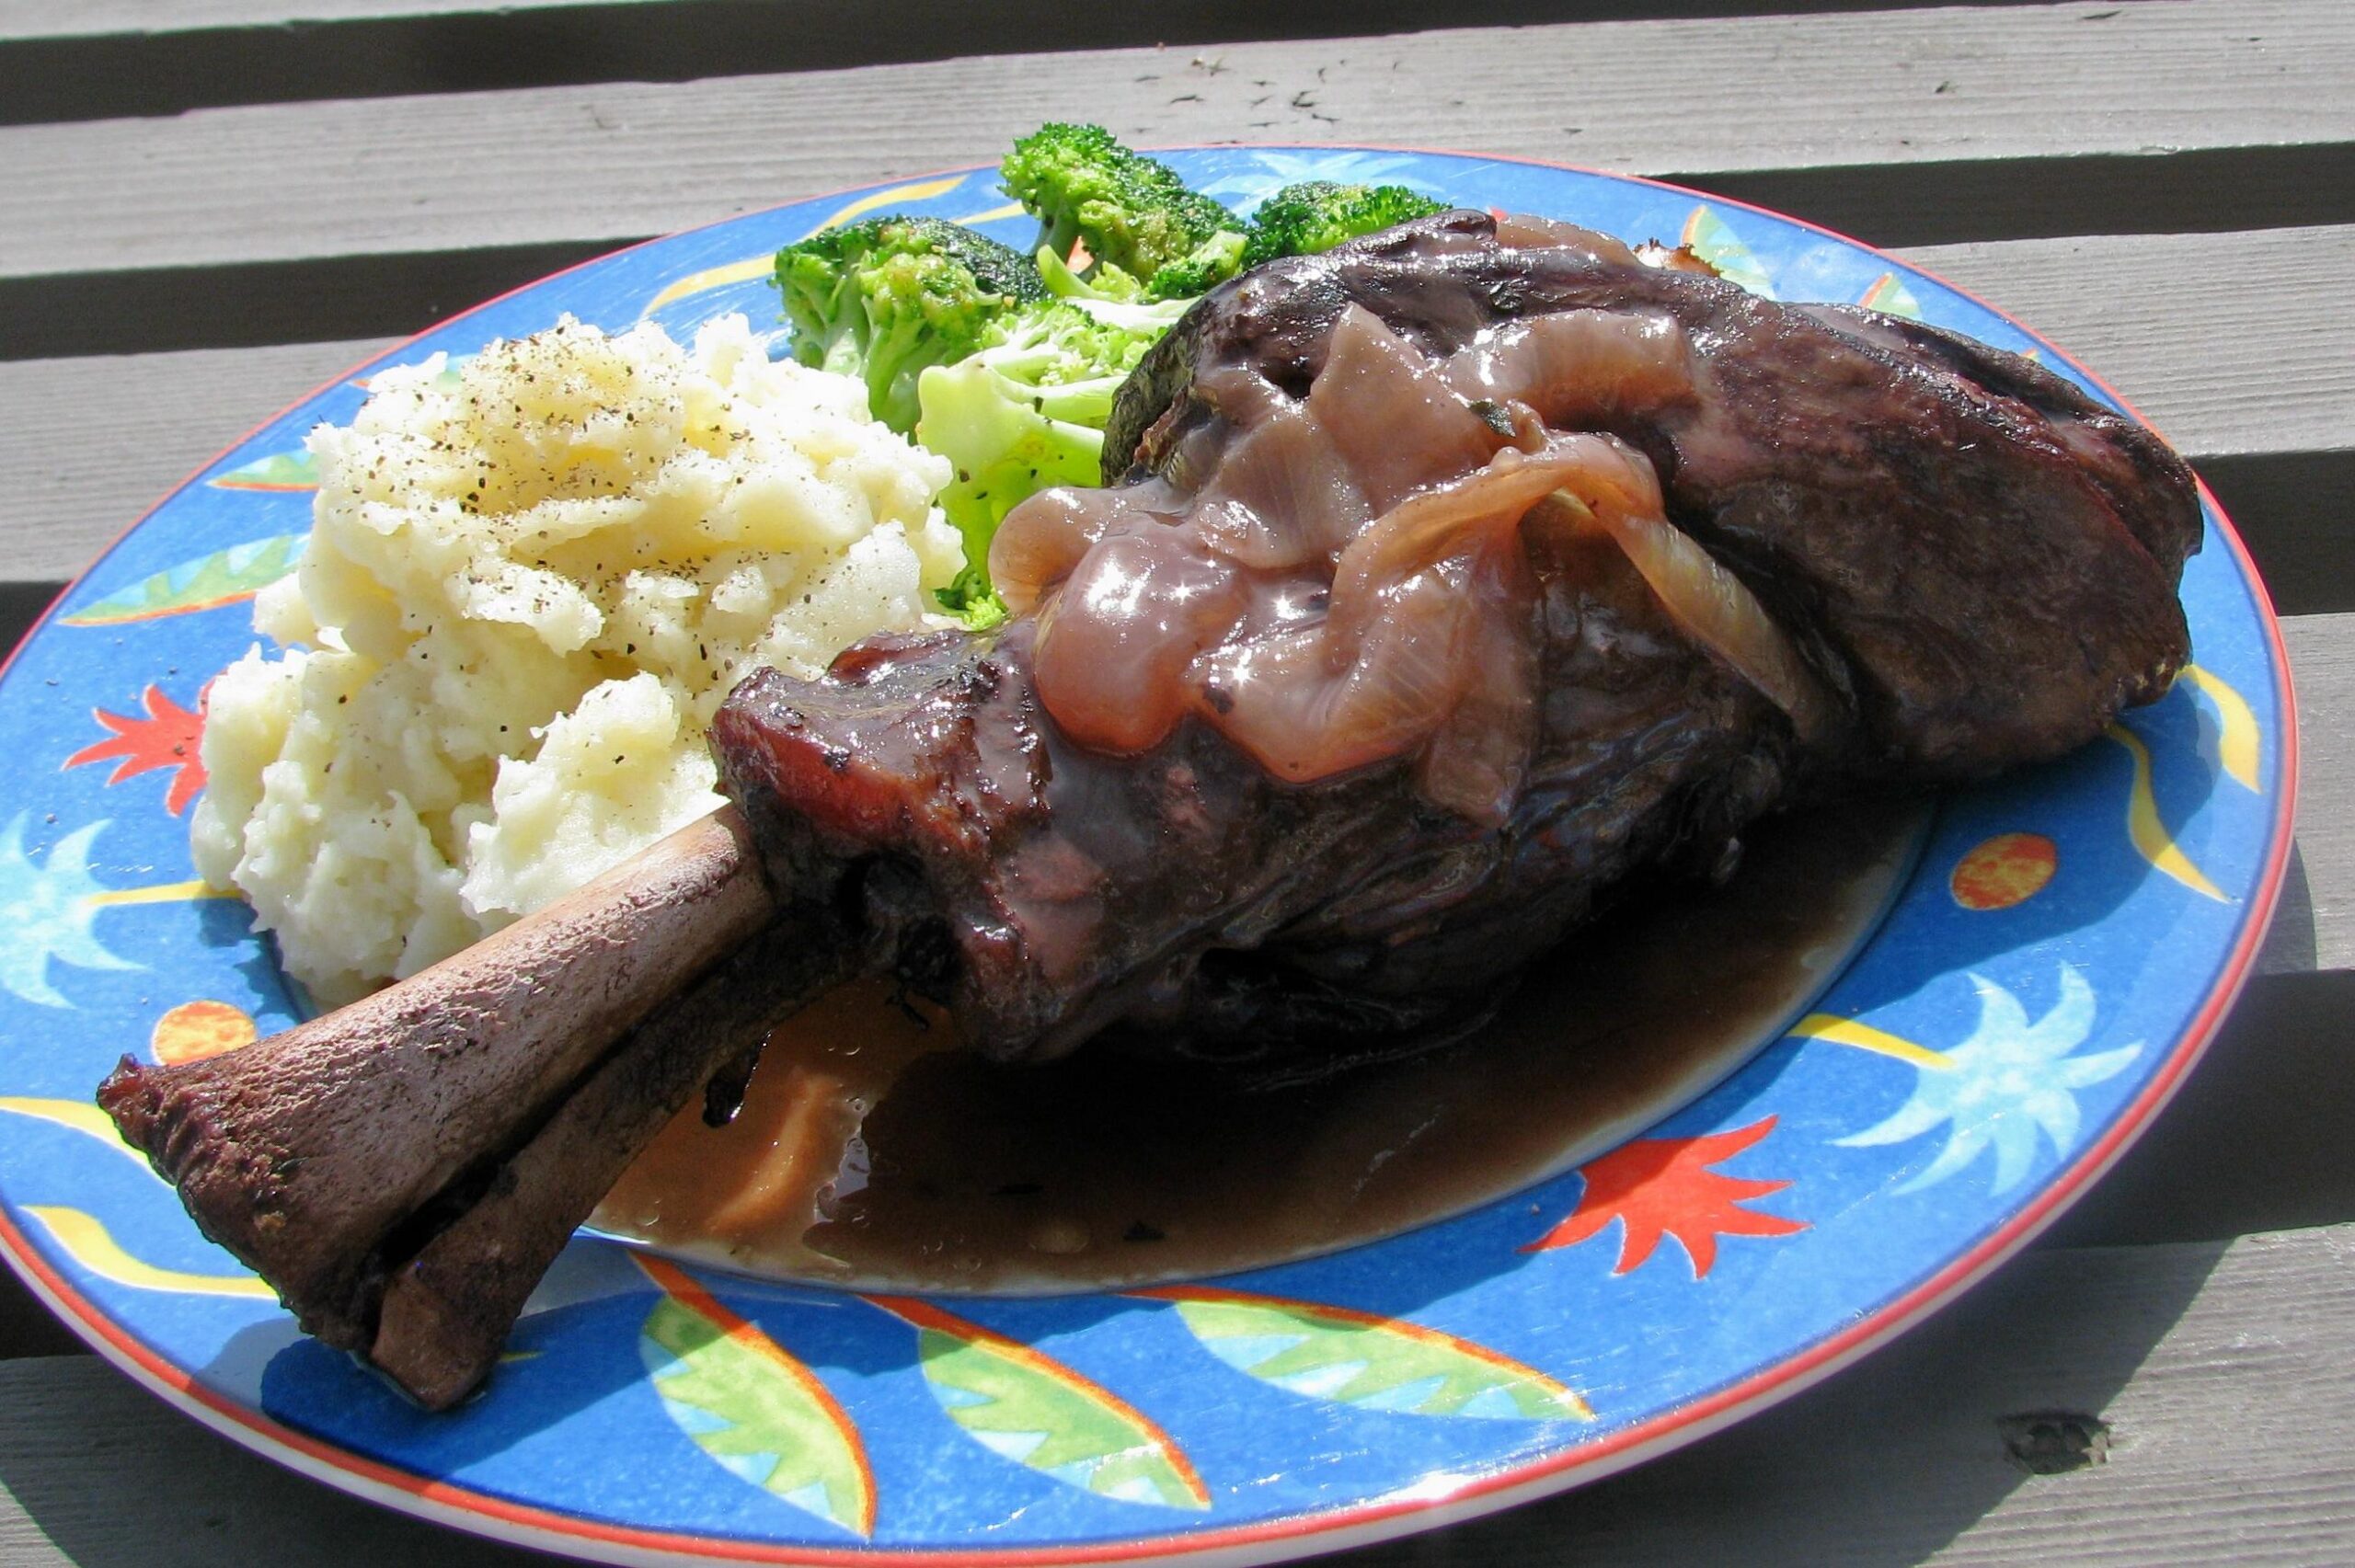  Tender, fall-off-the-bone lamb shanks in a rich red wine sauce